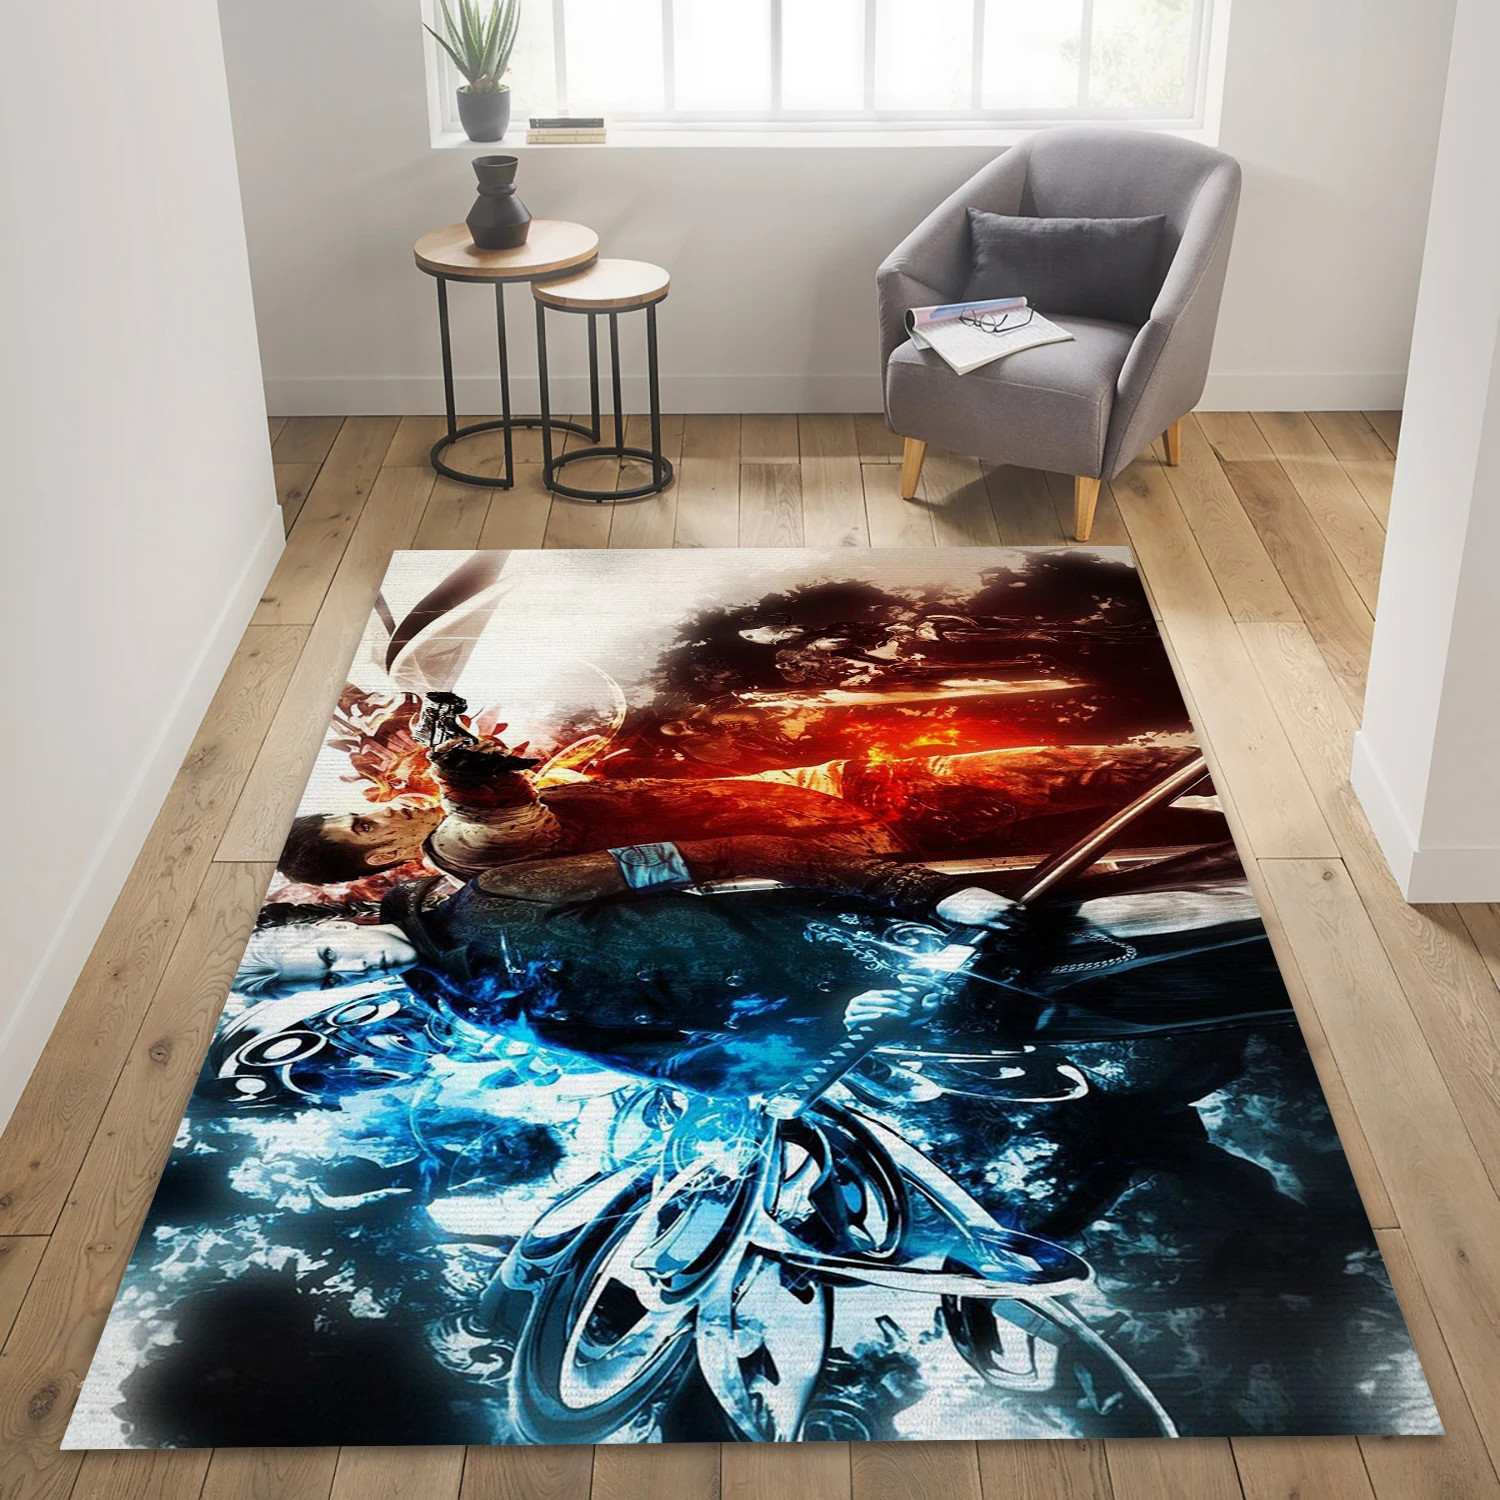 Dmc Devil May Cry Gaming Area Rug, Area Rug - Christmas Gift Decor - Indoor Outdoor Rugs